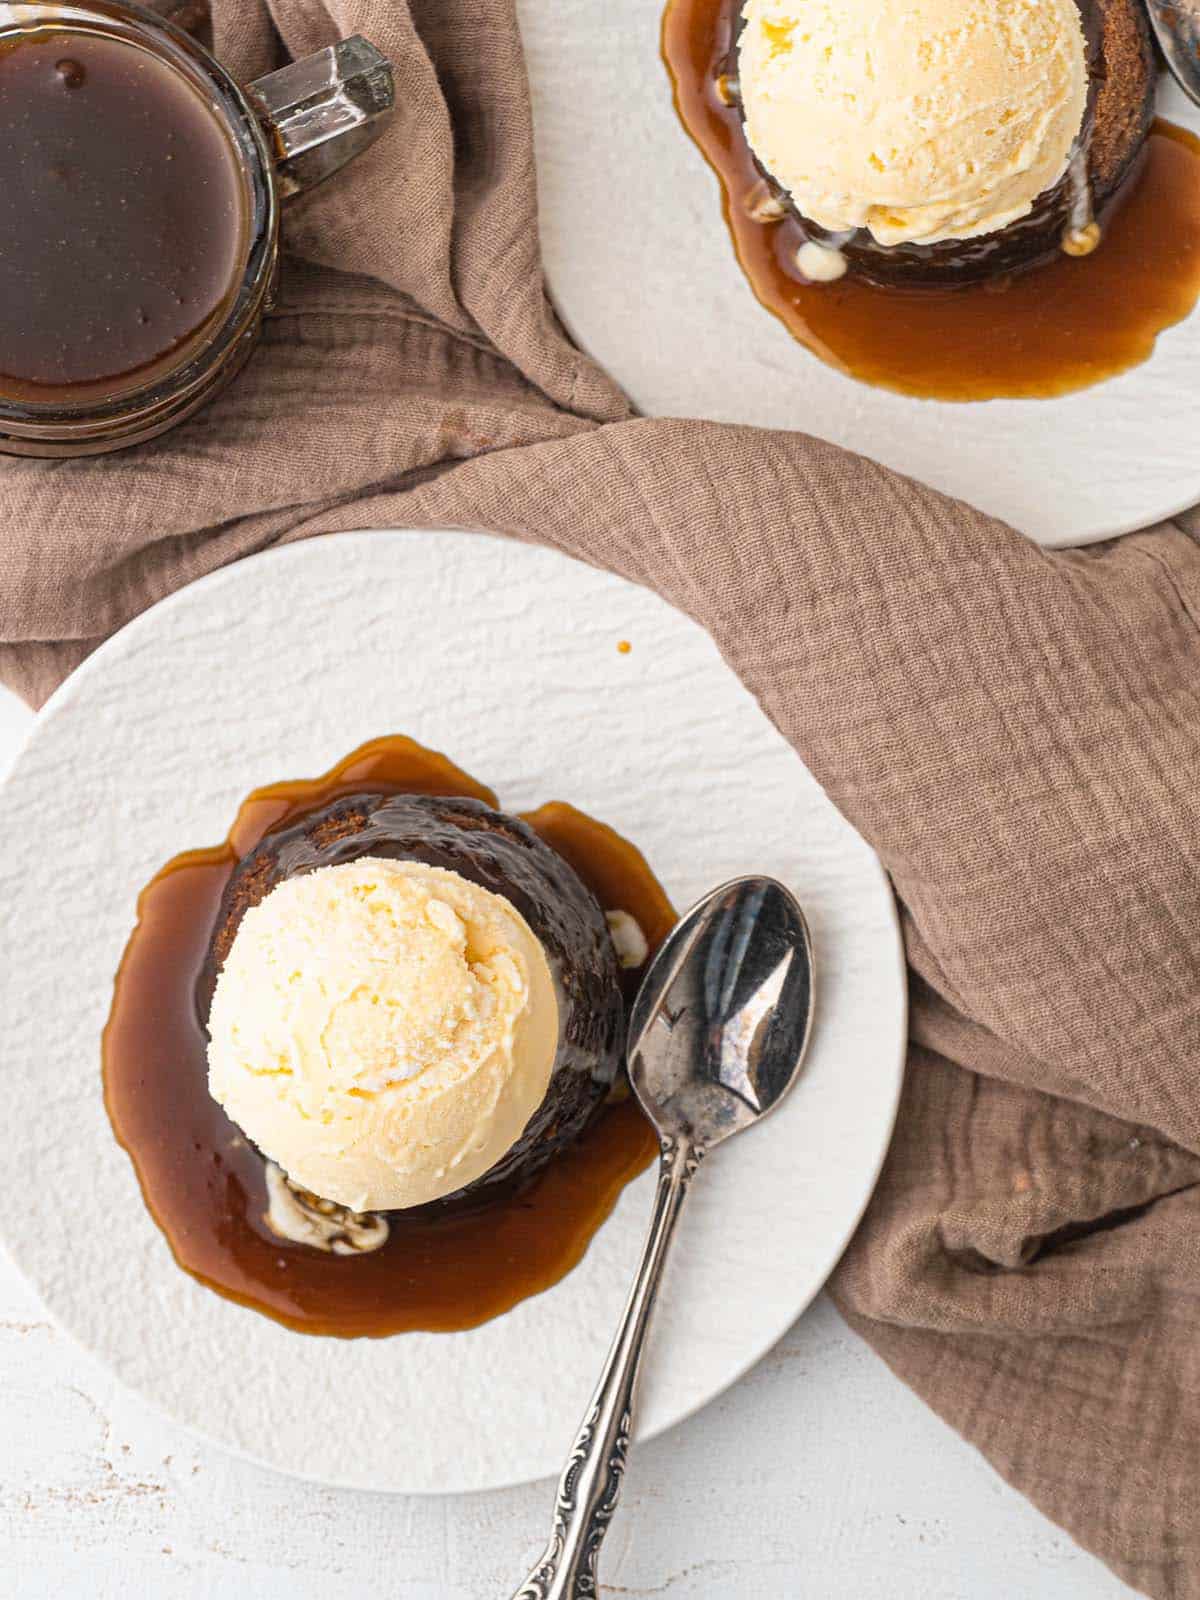 Sticky toffee pudding topped with butterscotch sauce and ice cream